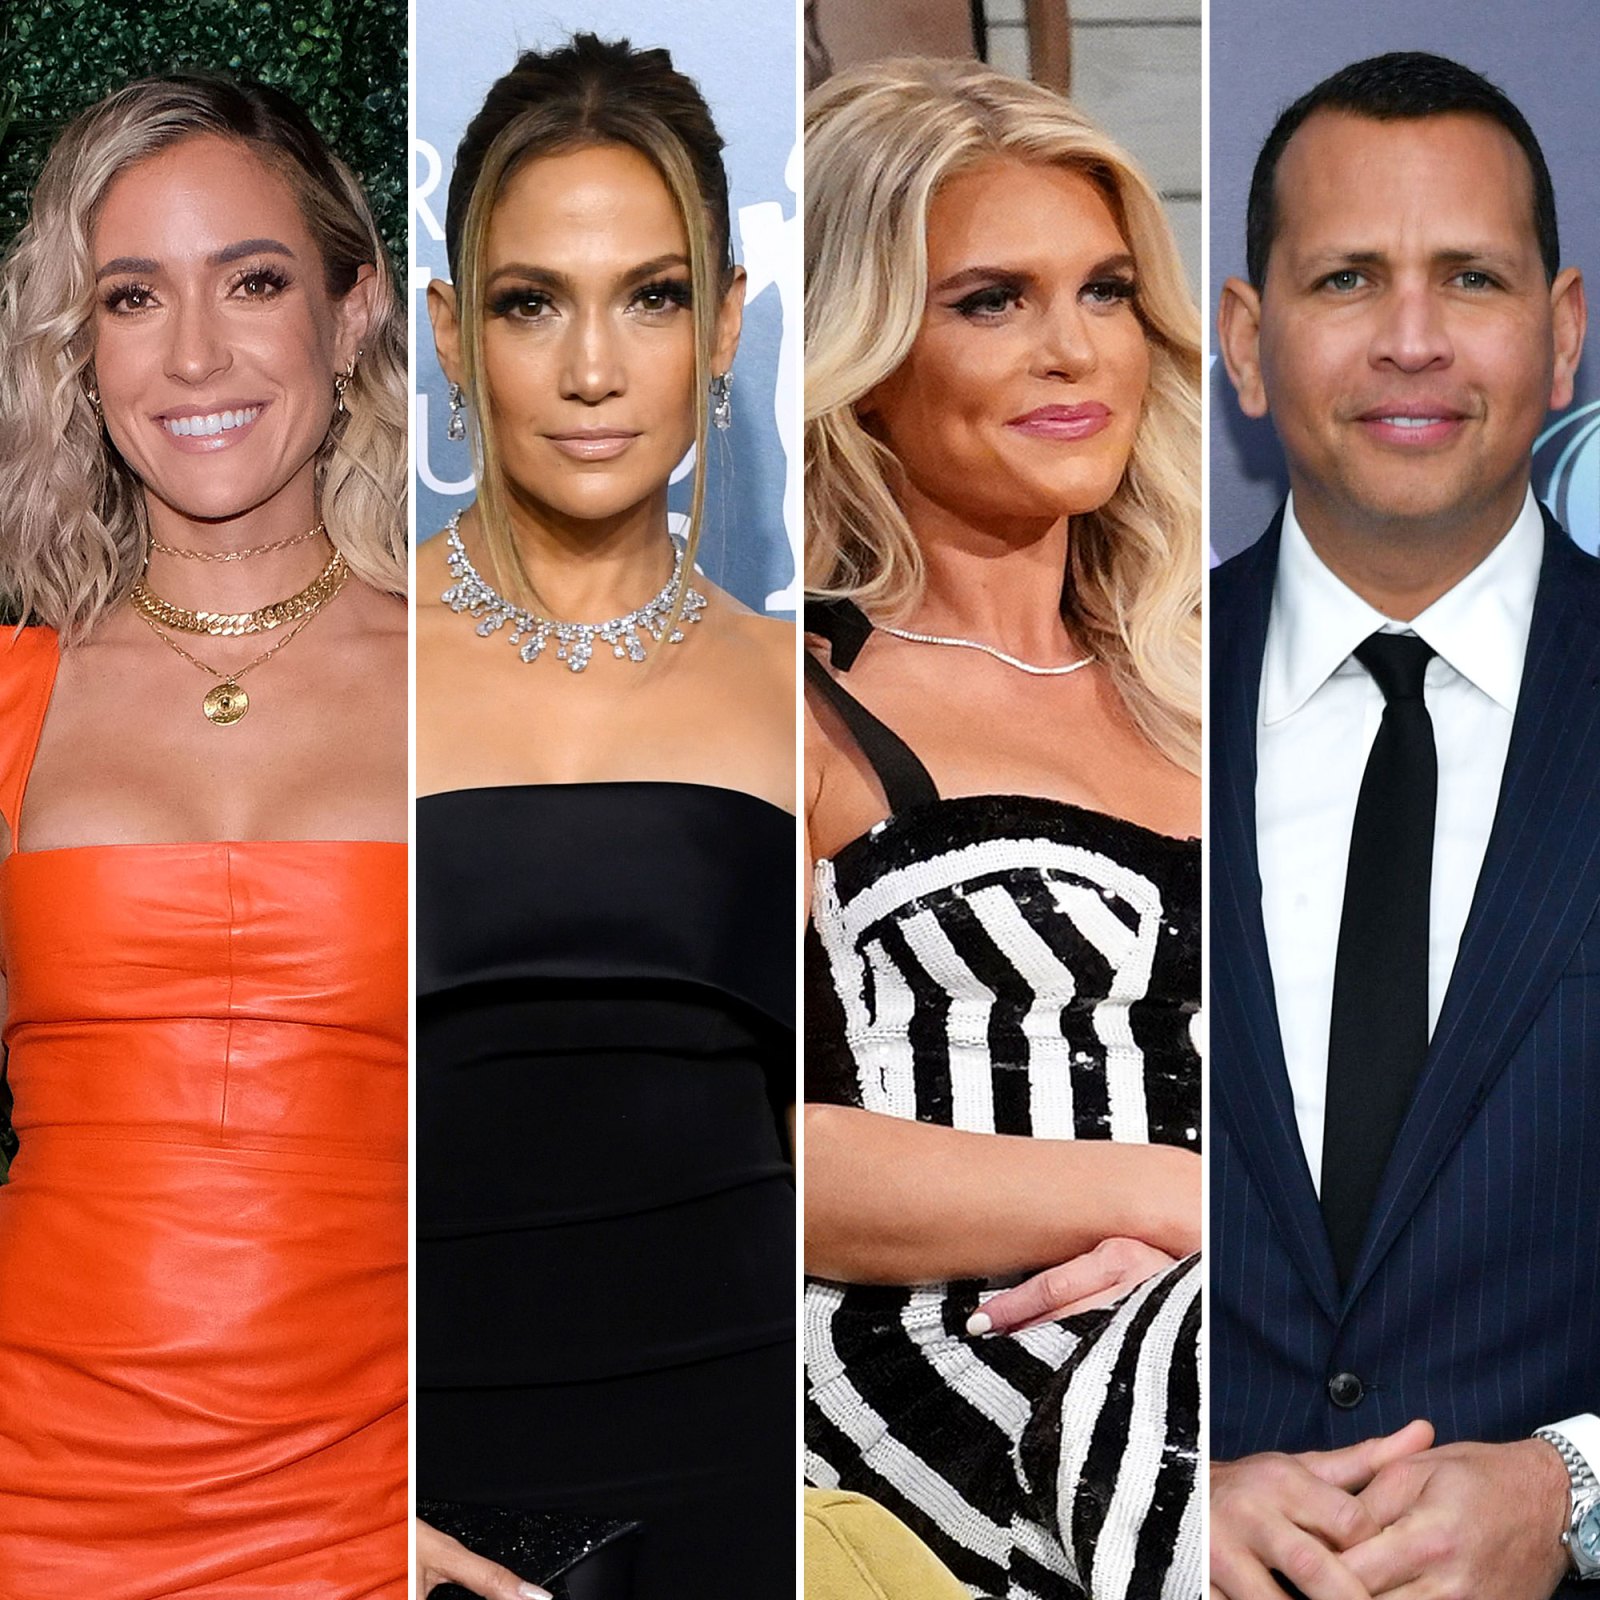 Kristin Cavallari Works Out to a Jennifer Lopez Song After Madison LeCroy Denies Alex Rodriguez Affair Rumors Justin Anderson